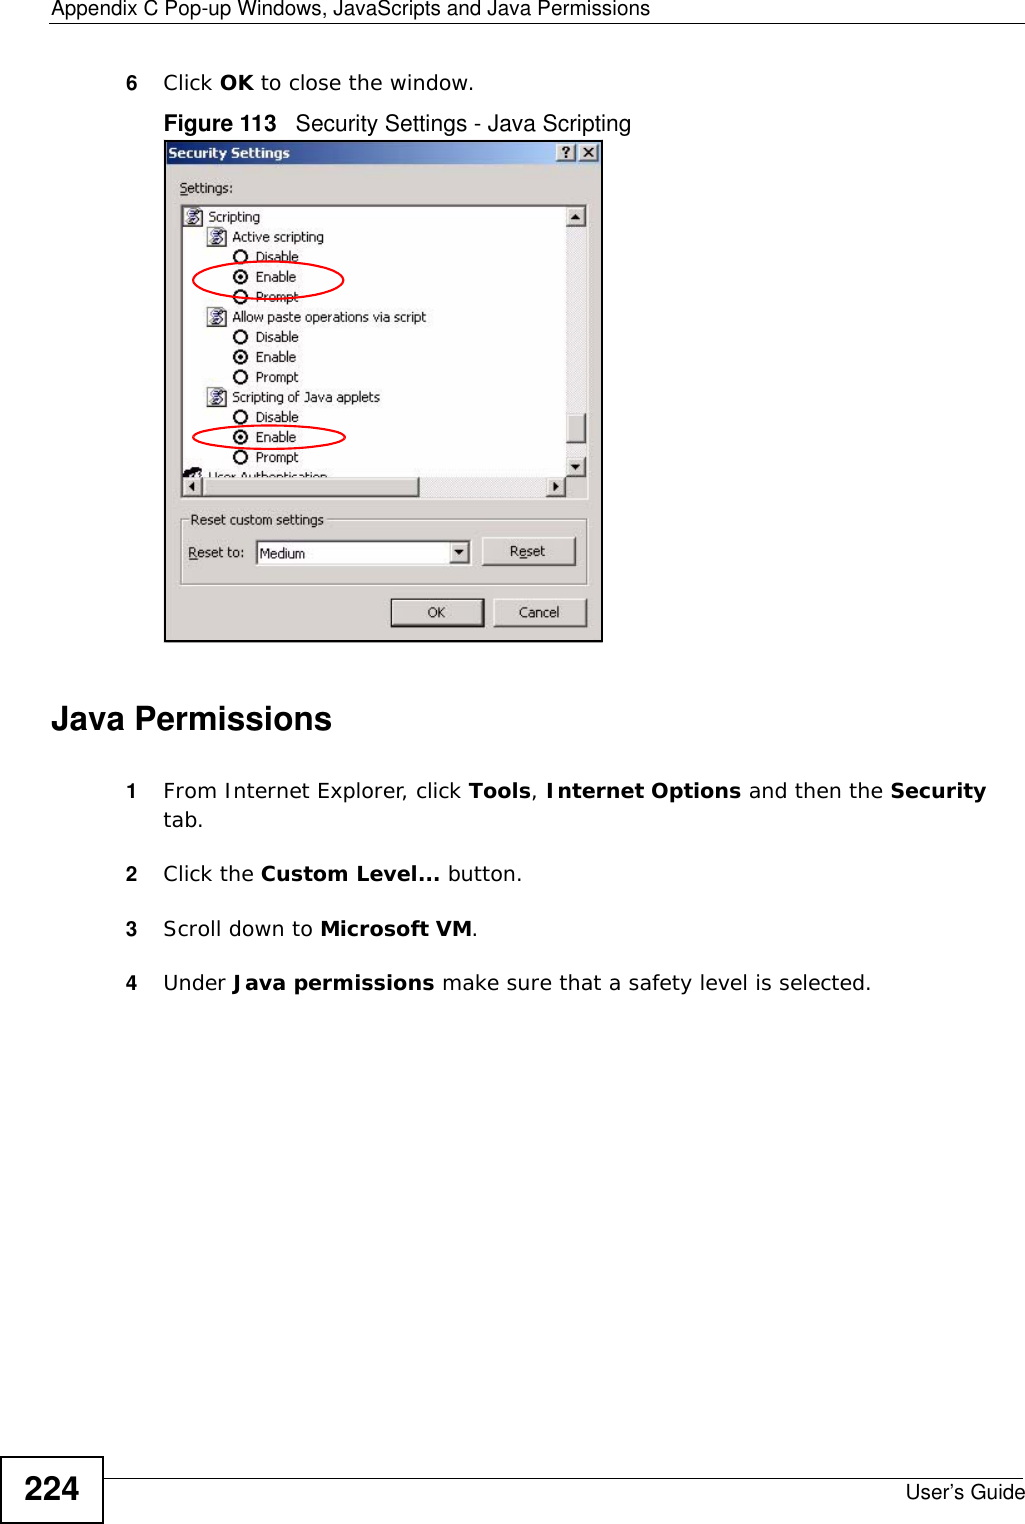 Appendix C Pop-up Windows, JavaScripts and Java PermissionsUser’s Guide2246Click OK to close the window.Figure 113   Security Settings - Java ScriptingJava Permissions1From Internet Explorer, click Tools, Internet Options and then the Security tab. 2Click the Custom Level... button. 3Scroll down to Microsoft VM. 4Under Java permissions make sure that a safety level is selected.